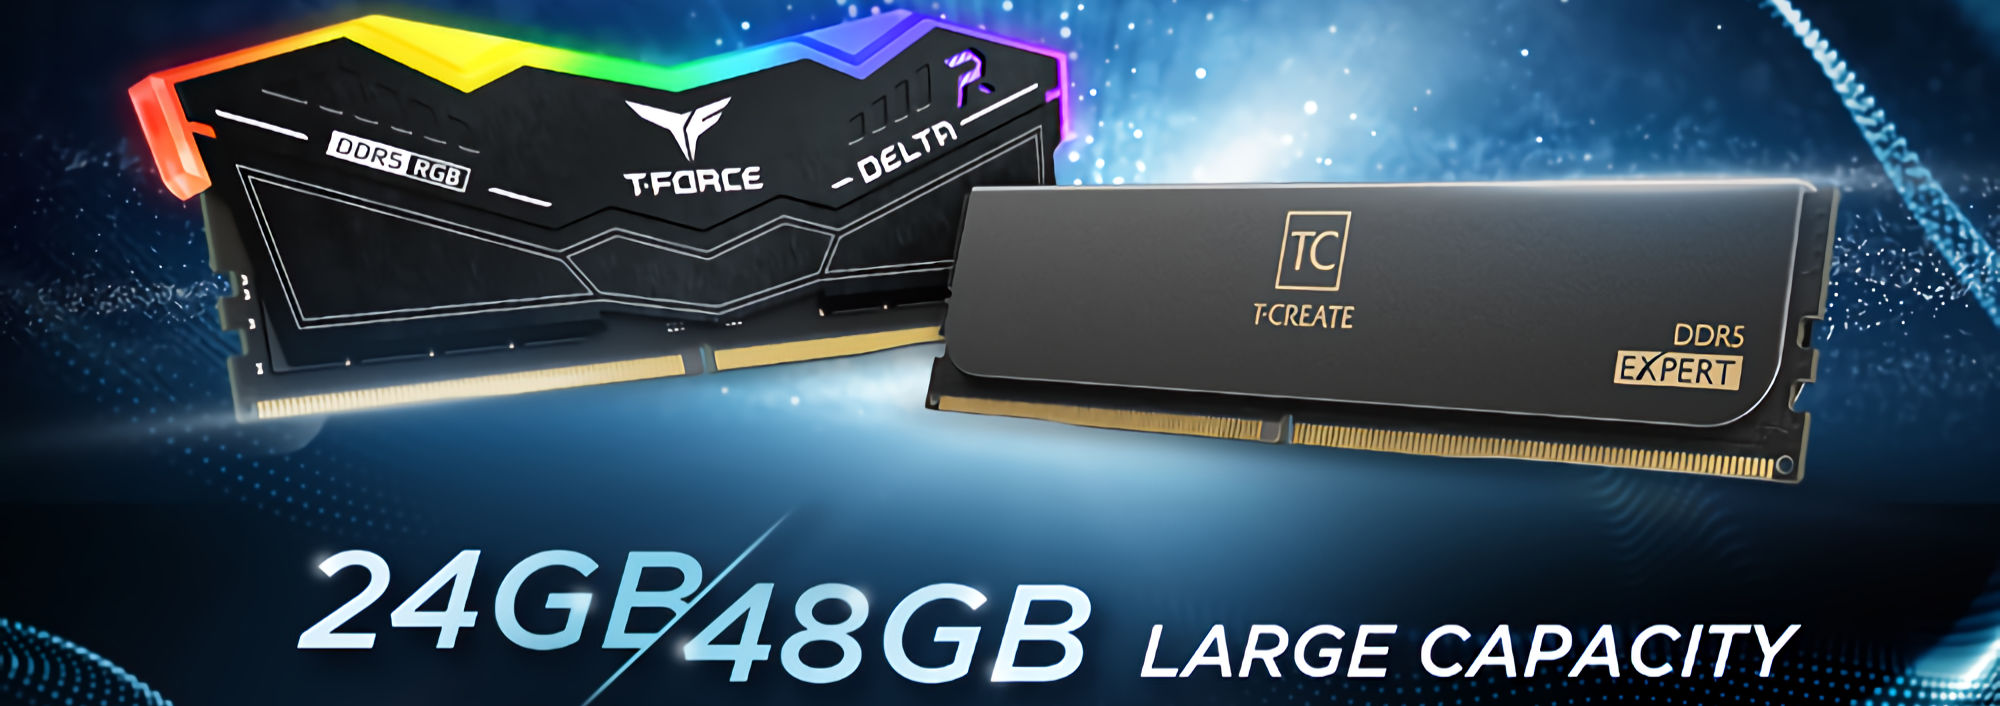 DDR5 memory spec is finally official but hold onto your DDR4 RAM modules